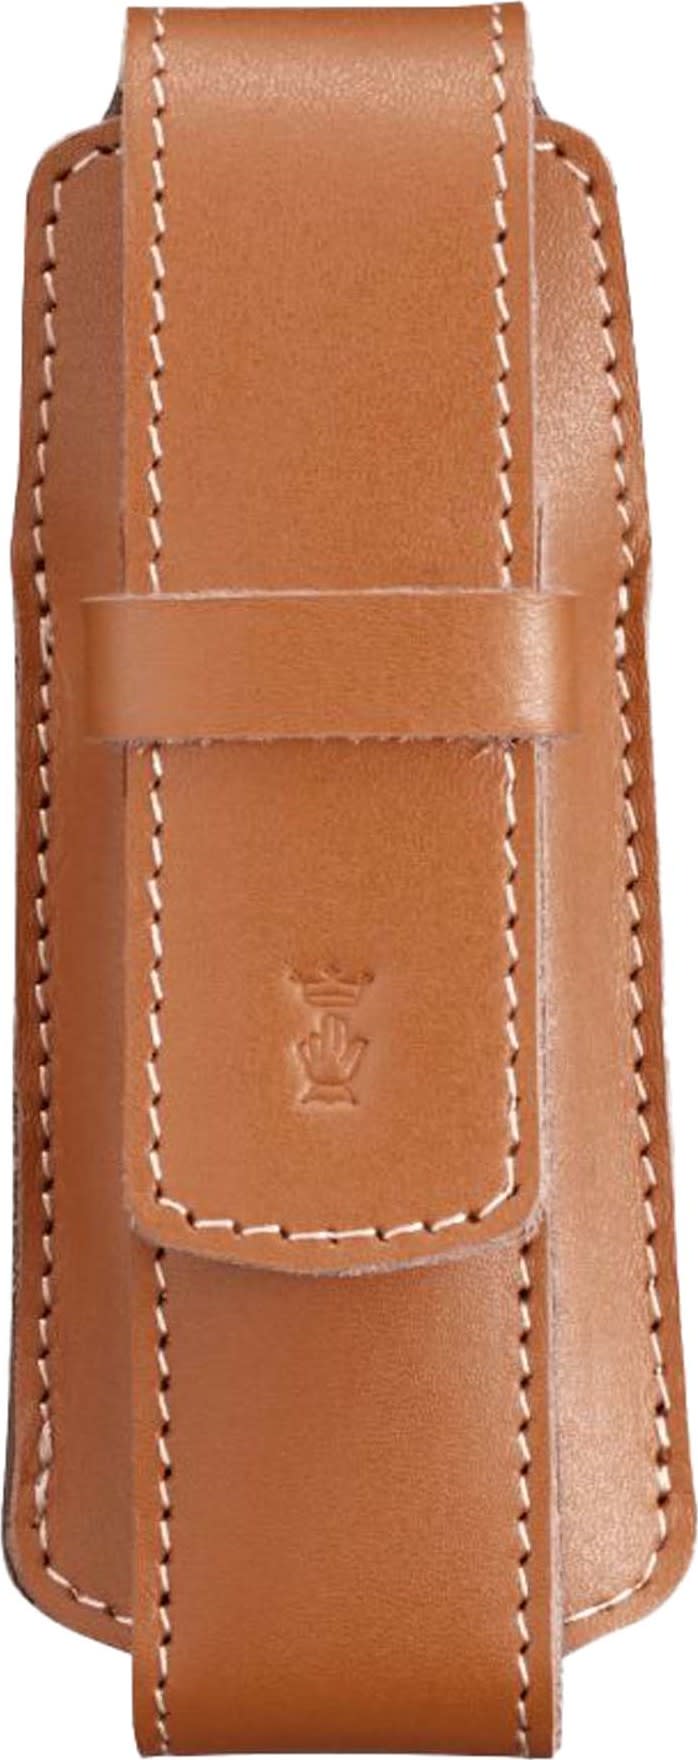 Leather Sheath Chic Brown Brown Opinel